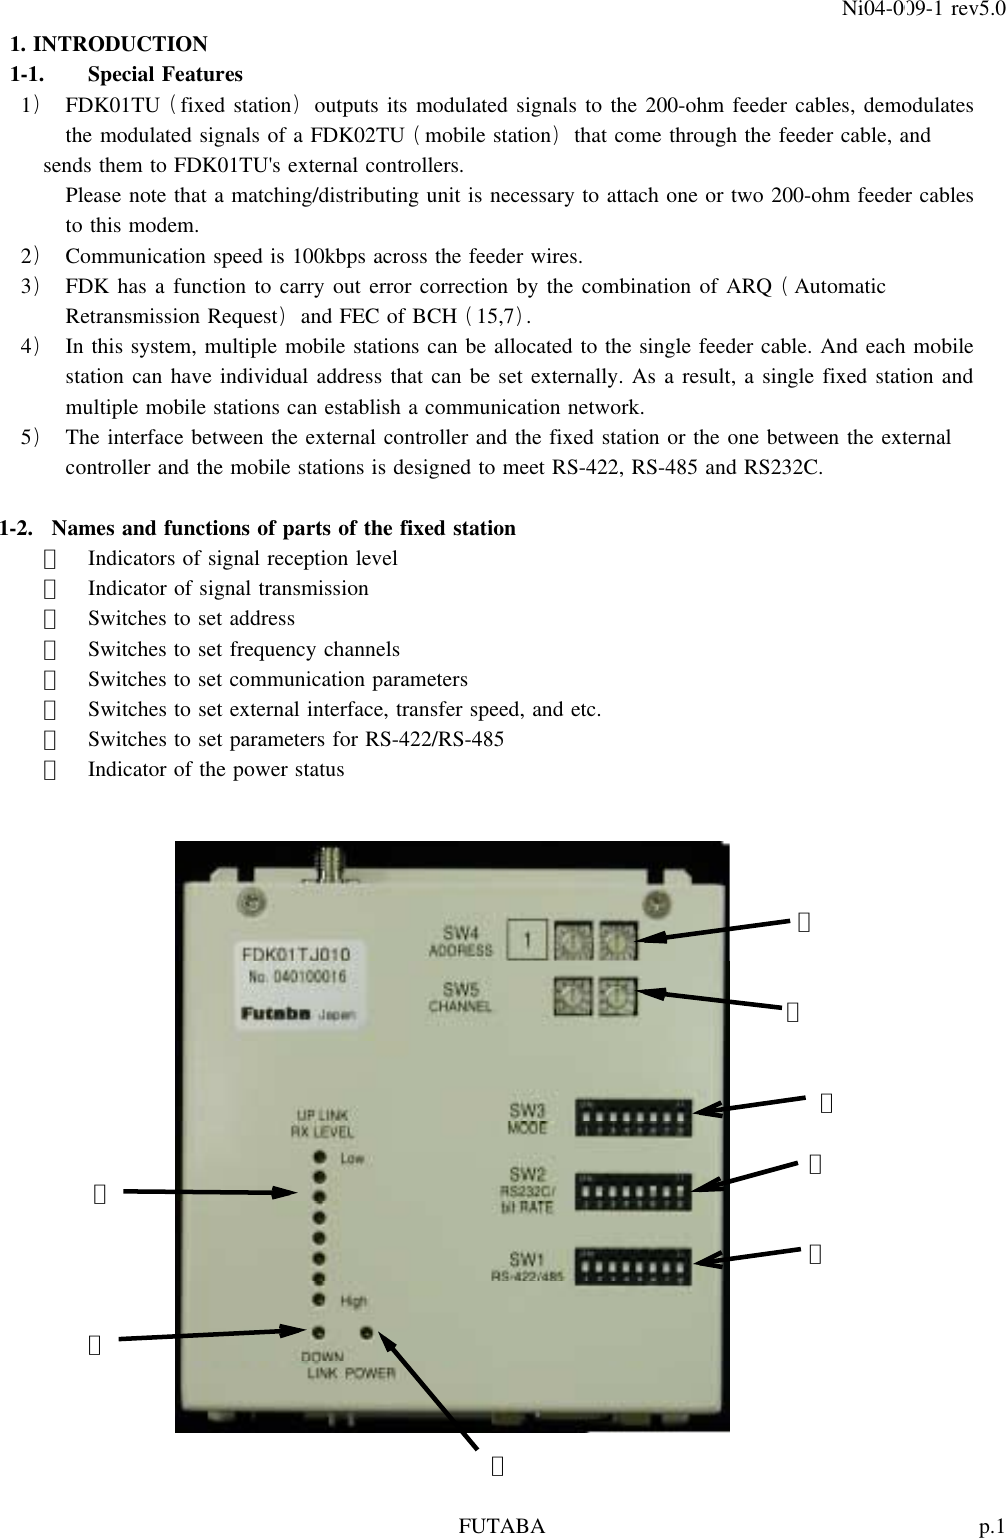 p.1FUTABANi04-009-1 rev5.01. INTRODUCTION1-1. Special Features1 FDK01TU fixed station outputs its modulated signals to the 200-ohm feeder cables, demodulates)()the modulated signals of a FDK02TU mobile station that come through the feeder cable, and()sends them to FDK01TU&apos;s external controllers.Please note that a matching/distributing unit is necessary to attach one or two 200-ohm feeder cablesto this modem.2 Communication speed is 100kbps across the feeder wires.)3 FDK has a function to carry out error correction by the combination of ARQ Automatic) (Retransmission Request and FEC of BCH 15,7 .)()4 In this system, multiple mobile stations can be allocated to the single feeder cable. And each mobile)station can have individual address that can be set externally. As a result, a single fixed station andmultiple mobile stations can establish a communication network.5 The interface between the external controller and the fixed station or the one between the external)controller and the mobile stations is designed to meet RS-422, RS-485 and RS232C.1-2. Names and functions of parts of the fixed station①Indicators of signal reception level②Indicator of signal transmission③Switches to set address④Switches to set frequency channels⑤Switches to set communication parameters⑥Switches to set external interface, transfer speed, and etc.⑦Switches to set parameters for RS-422/RS-485⑧Indicator of the power status③④⑤⑥①⑦②③